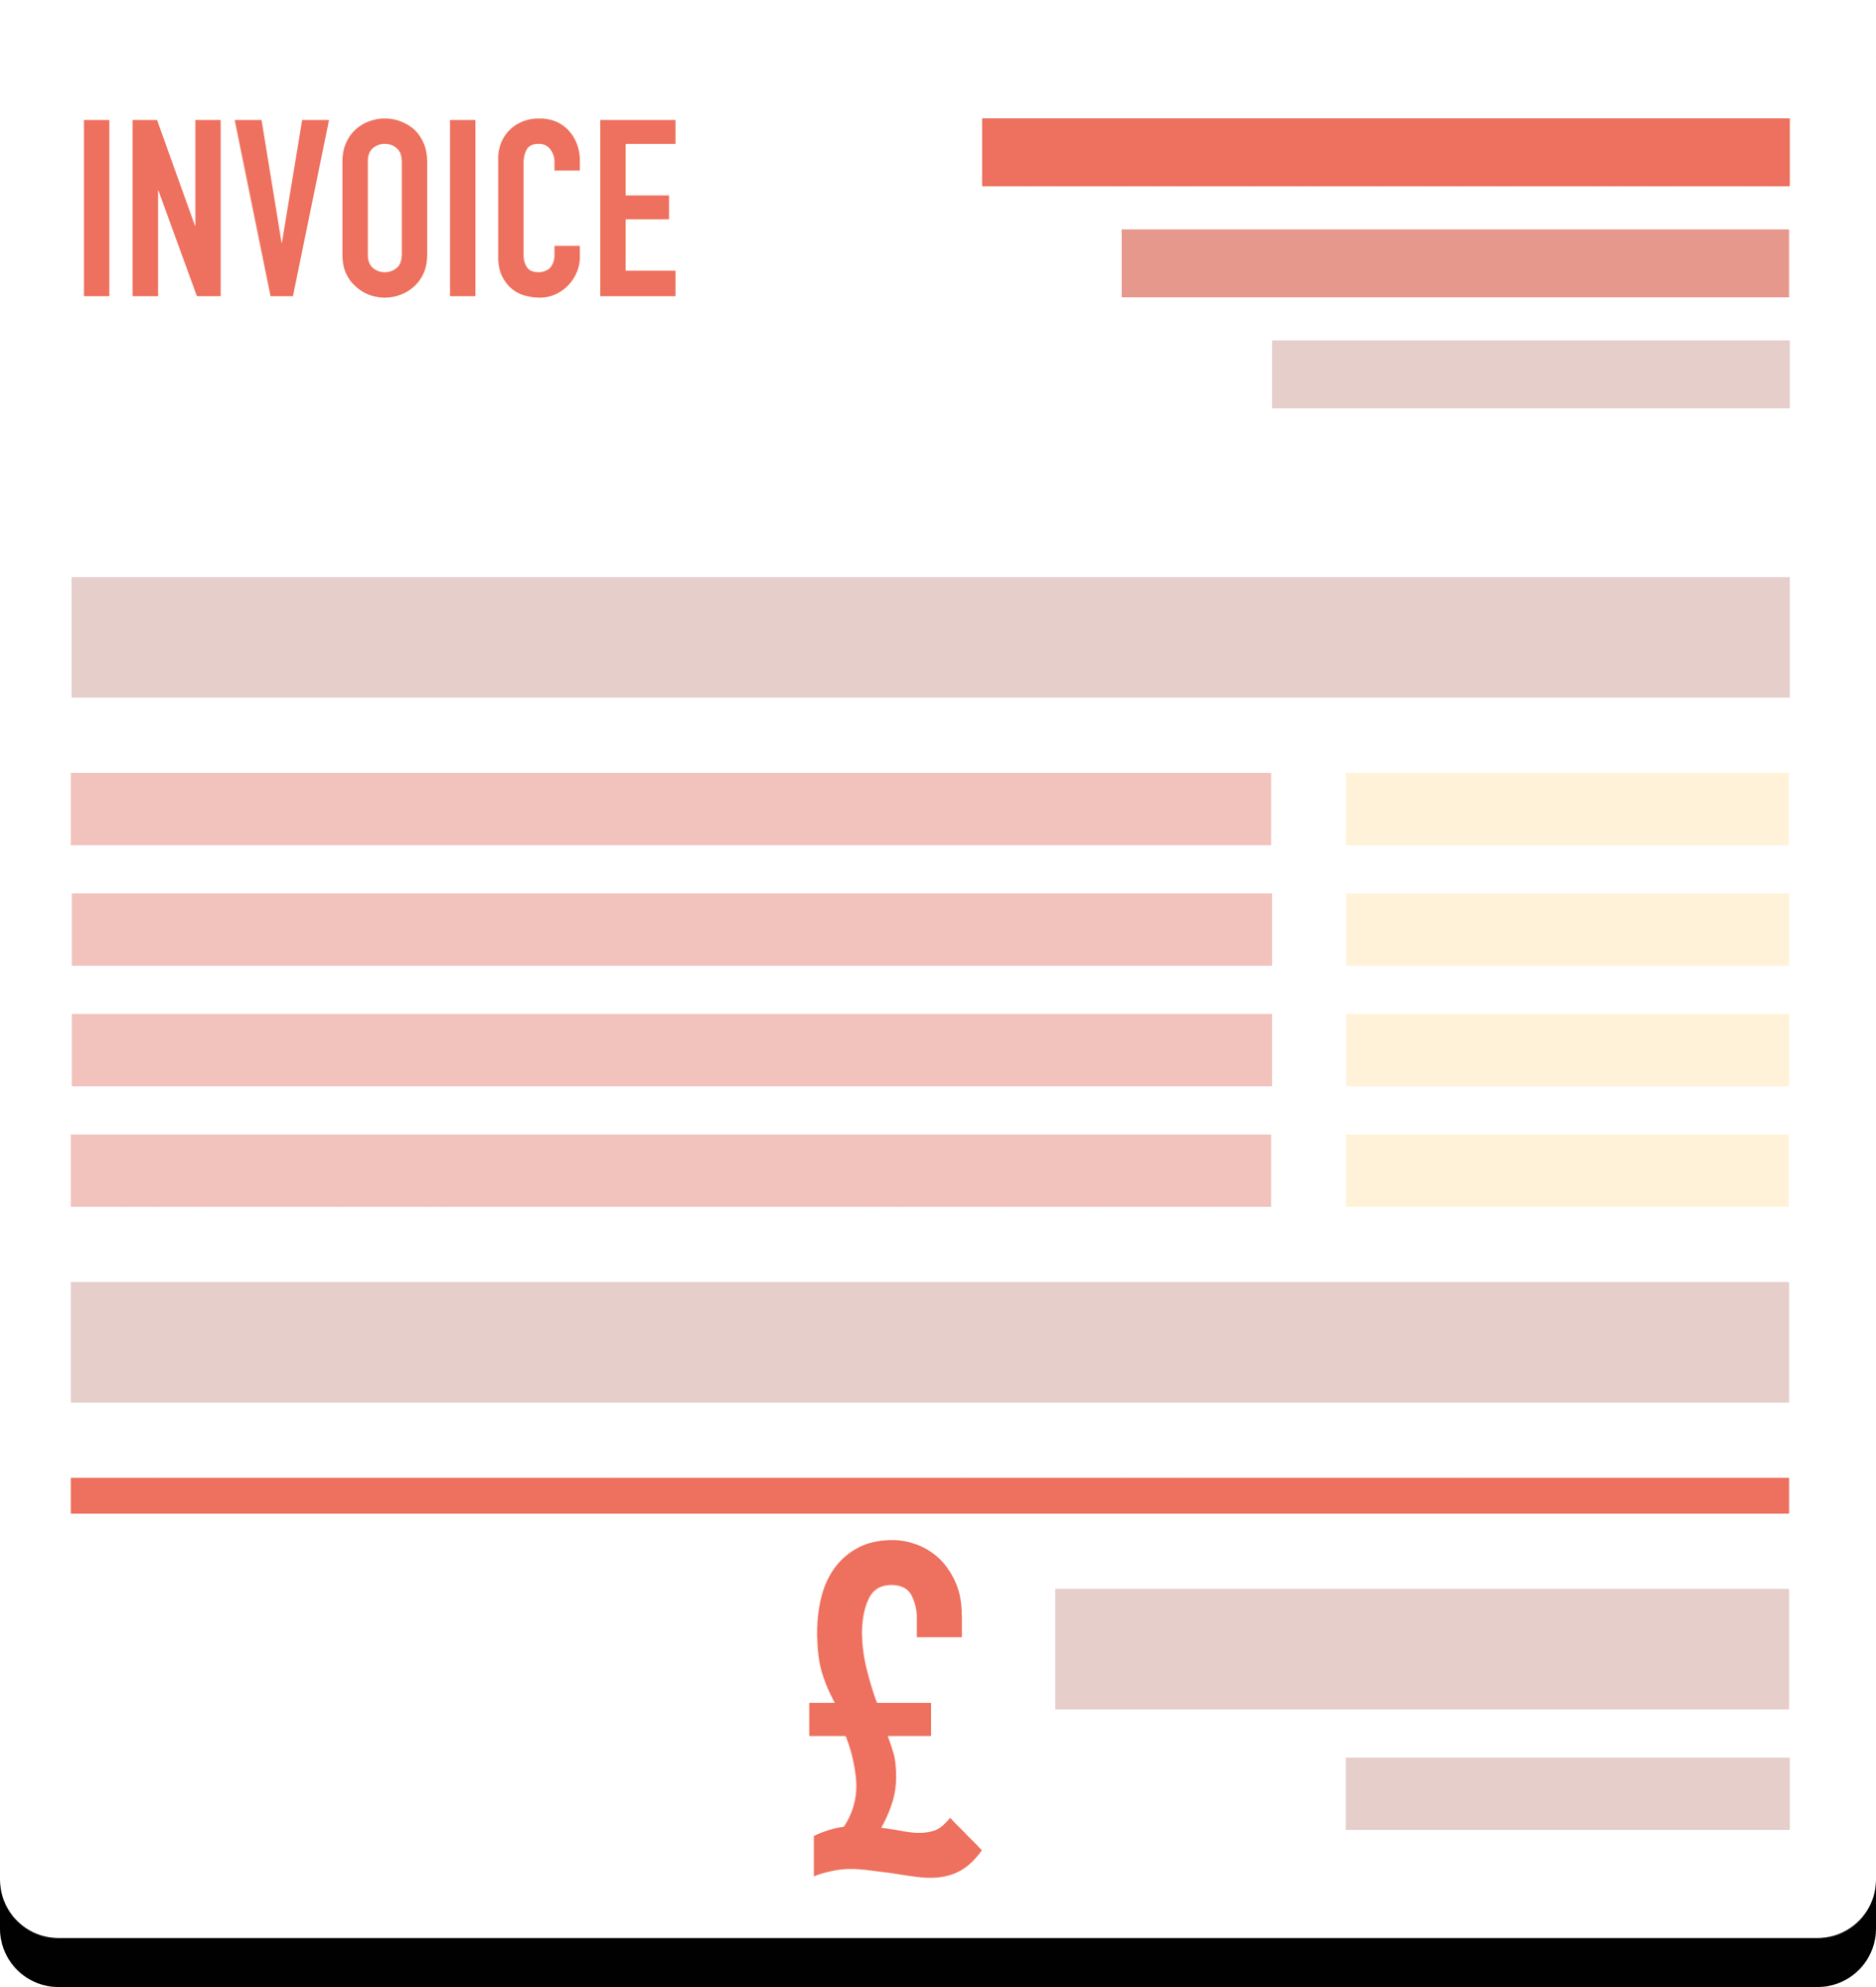 Invoice template for appliance repair